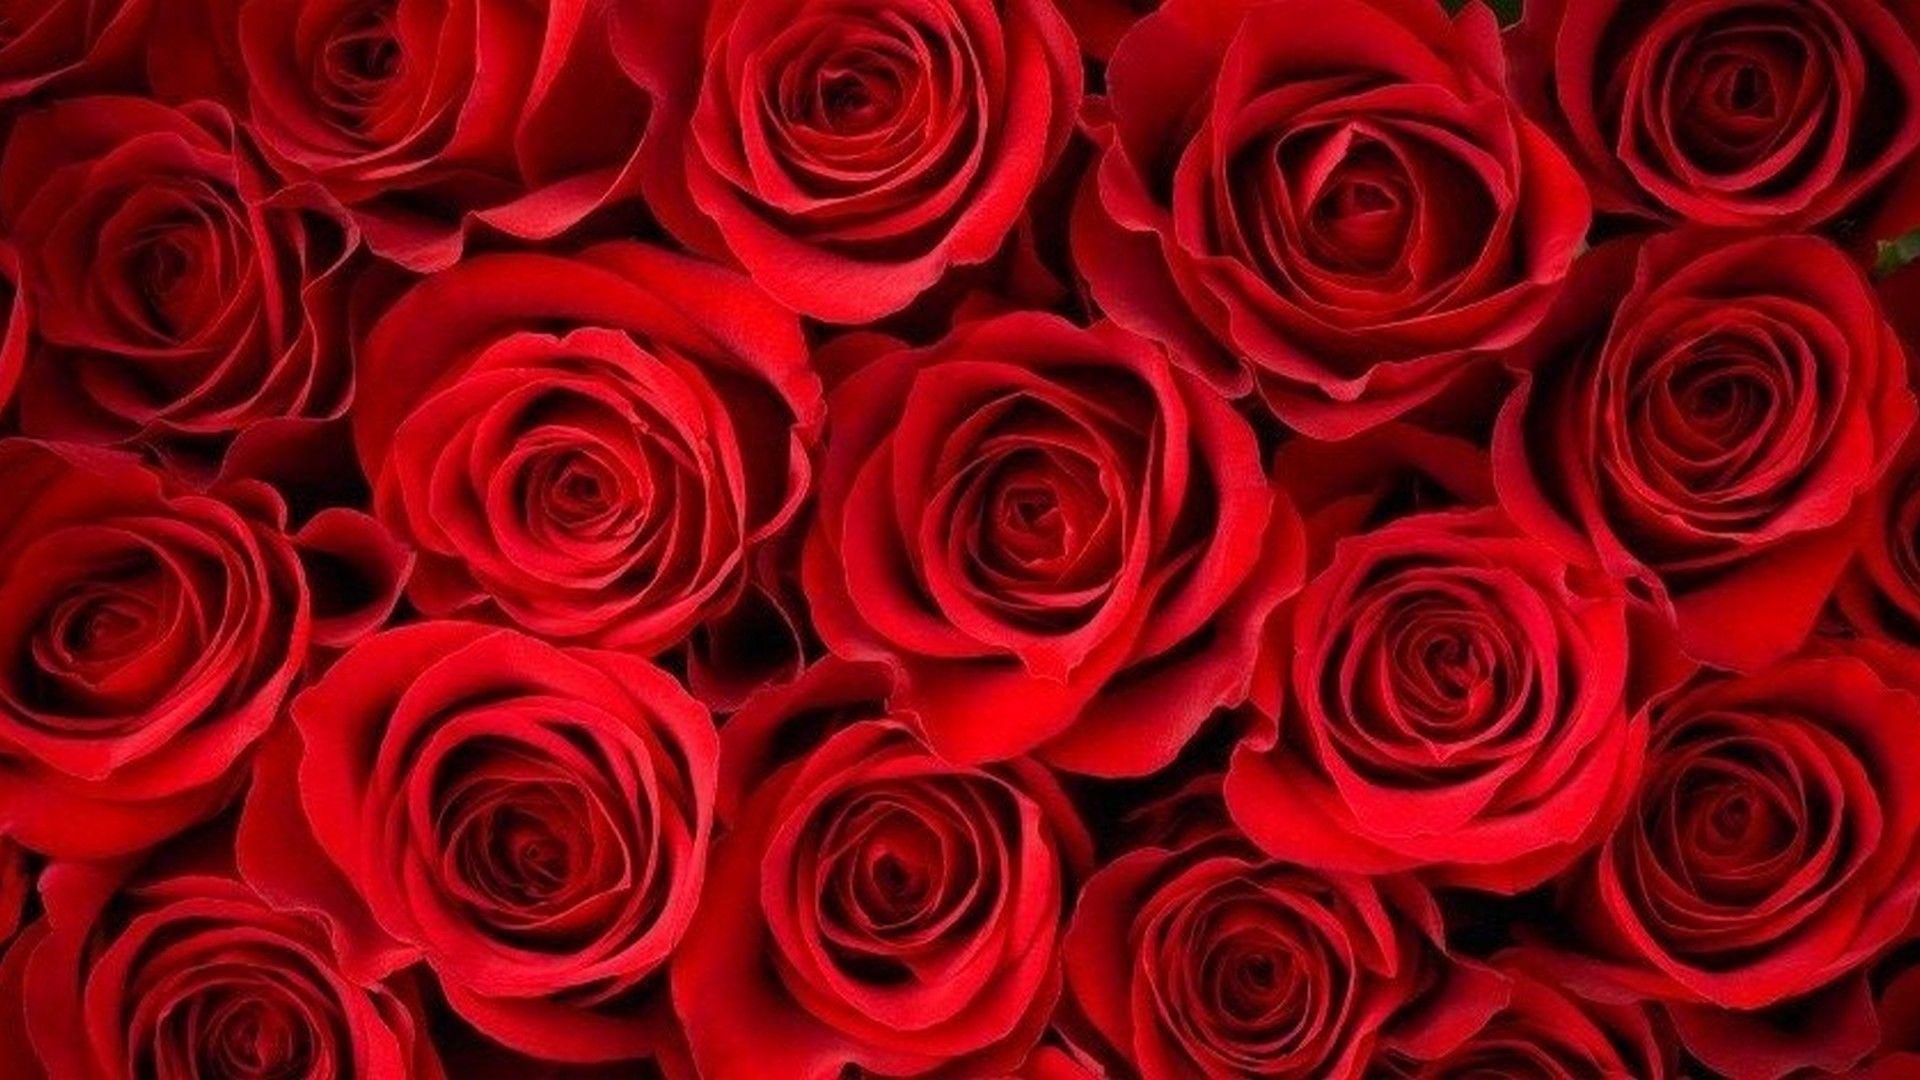 HD Red Rose Wallpaper. Rose flower picture, Rose